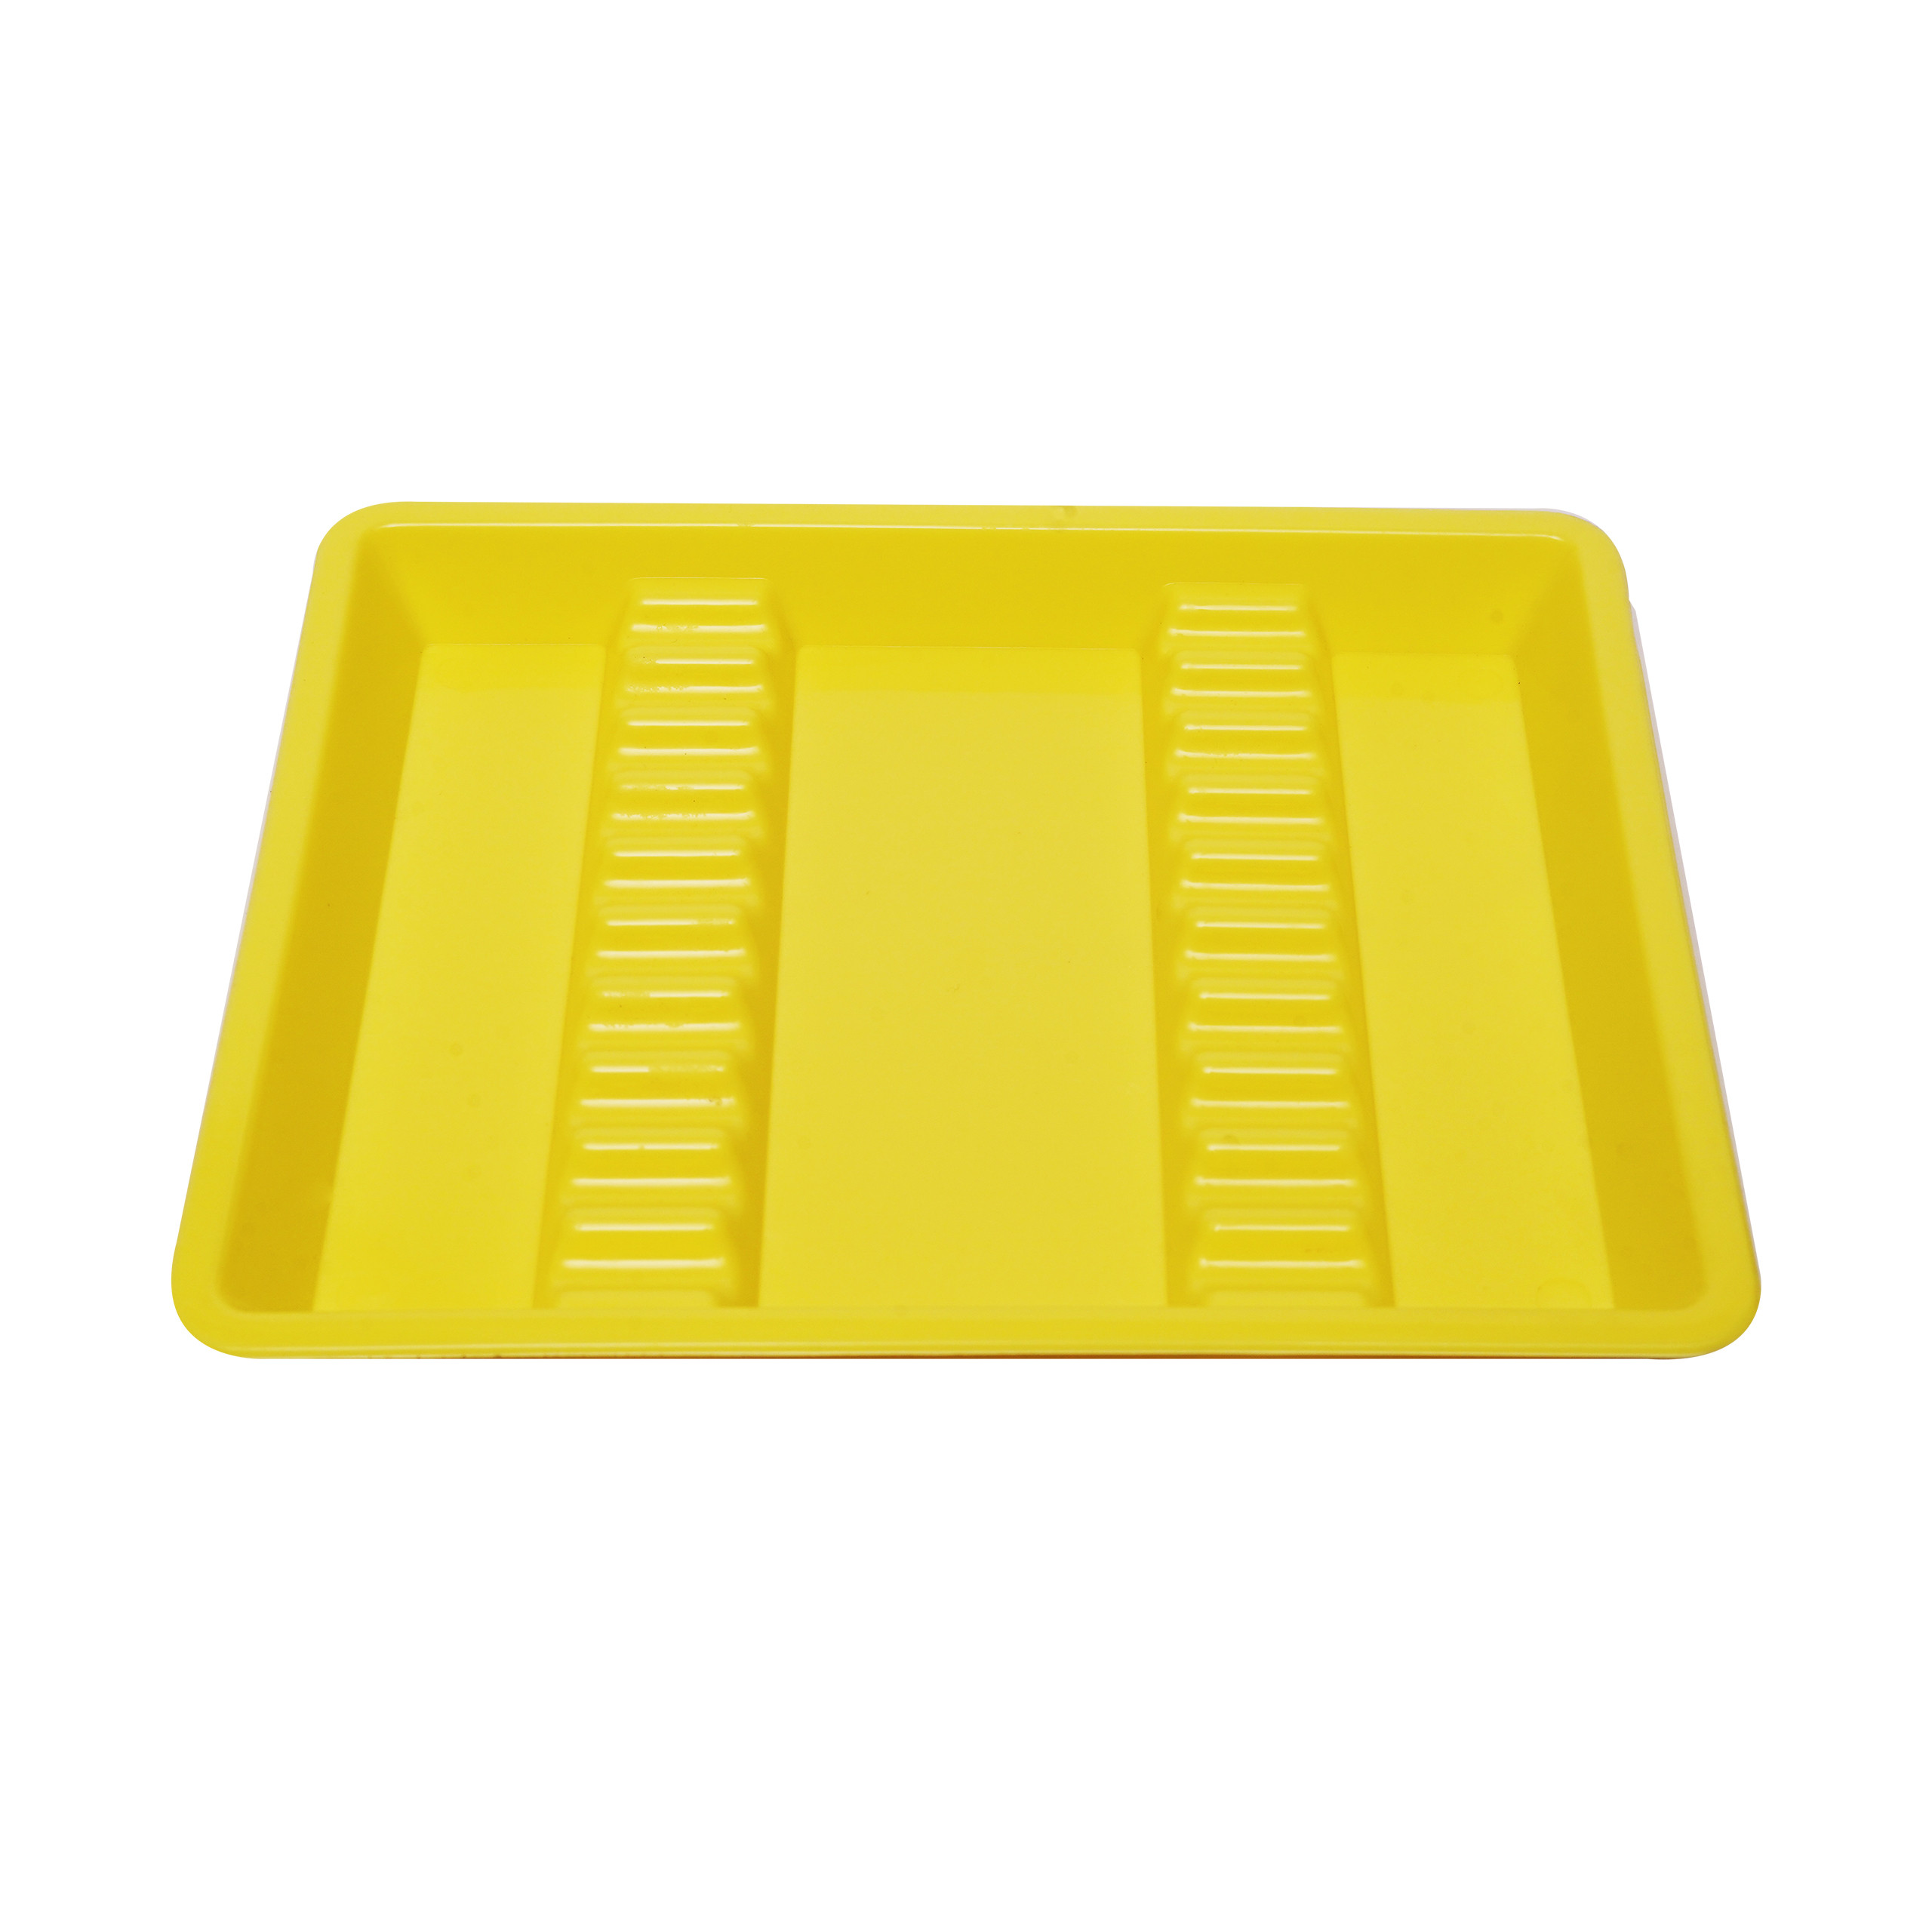 Instrument Tray Plastic Autocleavable (10 Pcs.) - Small